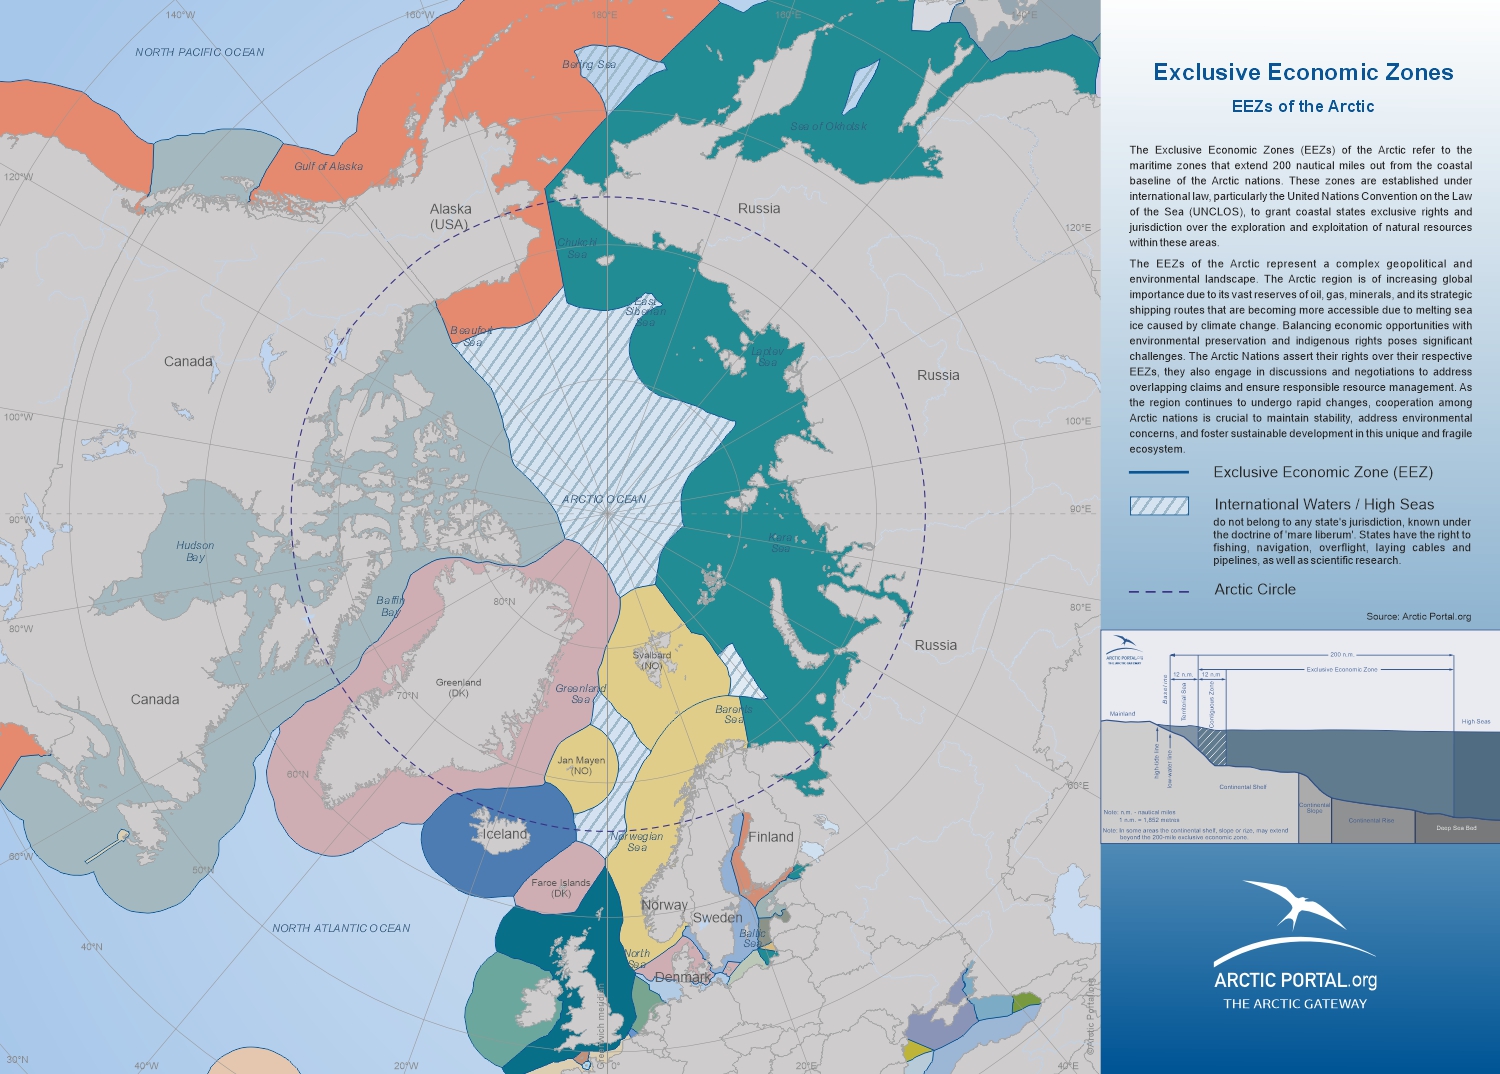 Map: Exclusive Economic Zones in the Arctic with colored zones